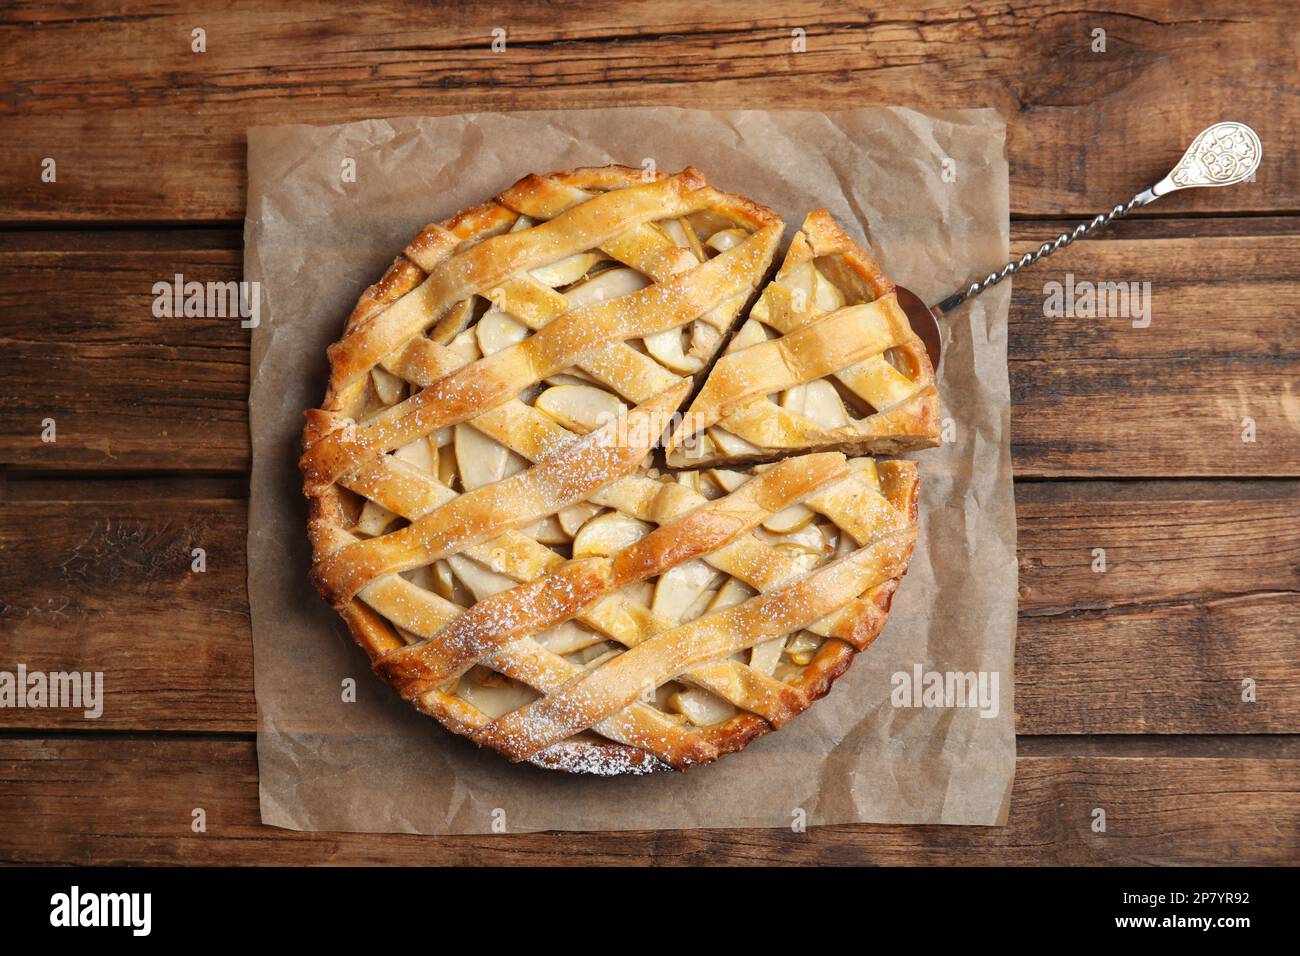 Delicious traditional apple pie on wooden table, top view Stock Photo